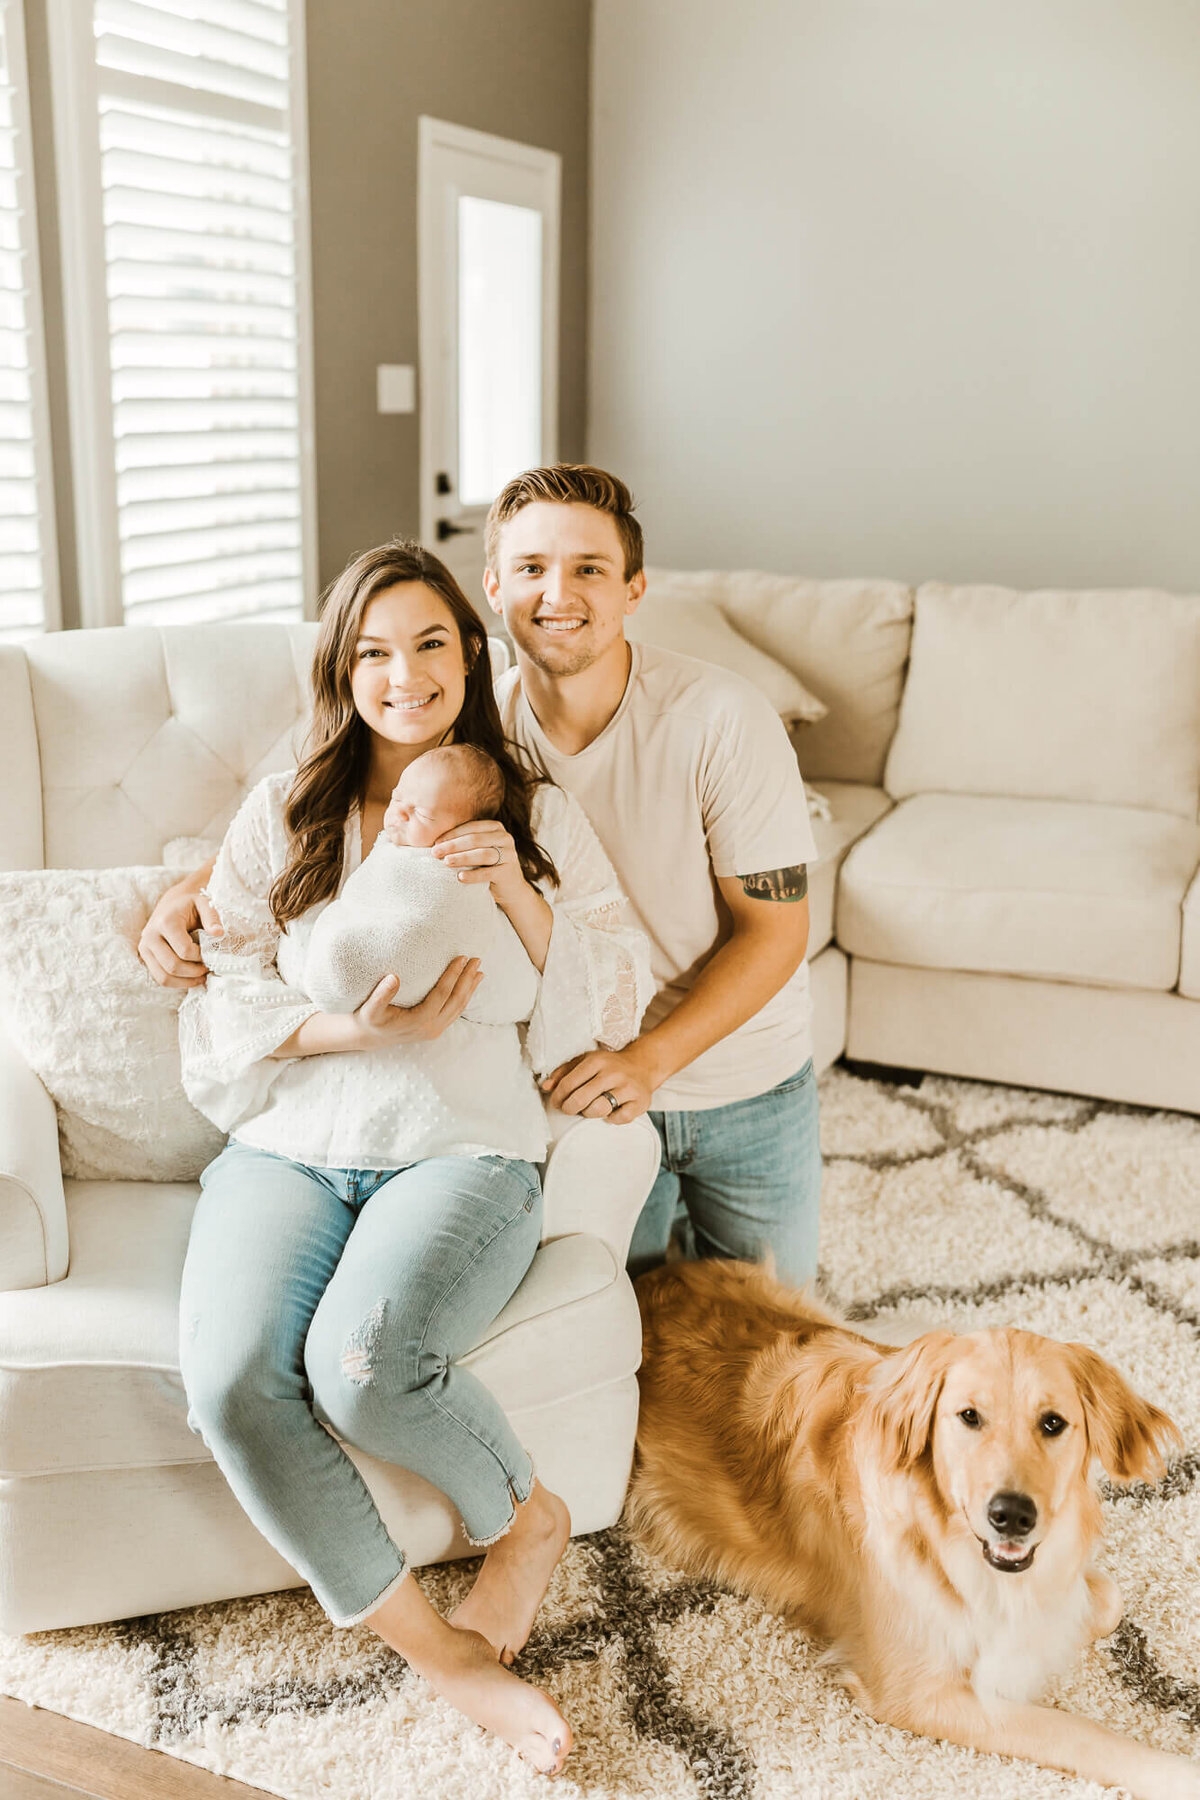 Mom and dad holding newborn infant with dog at their feet.